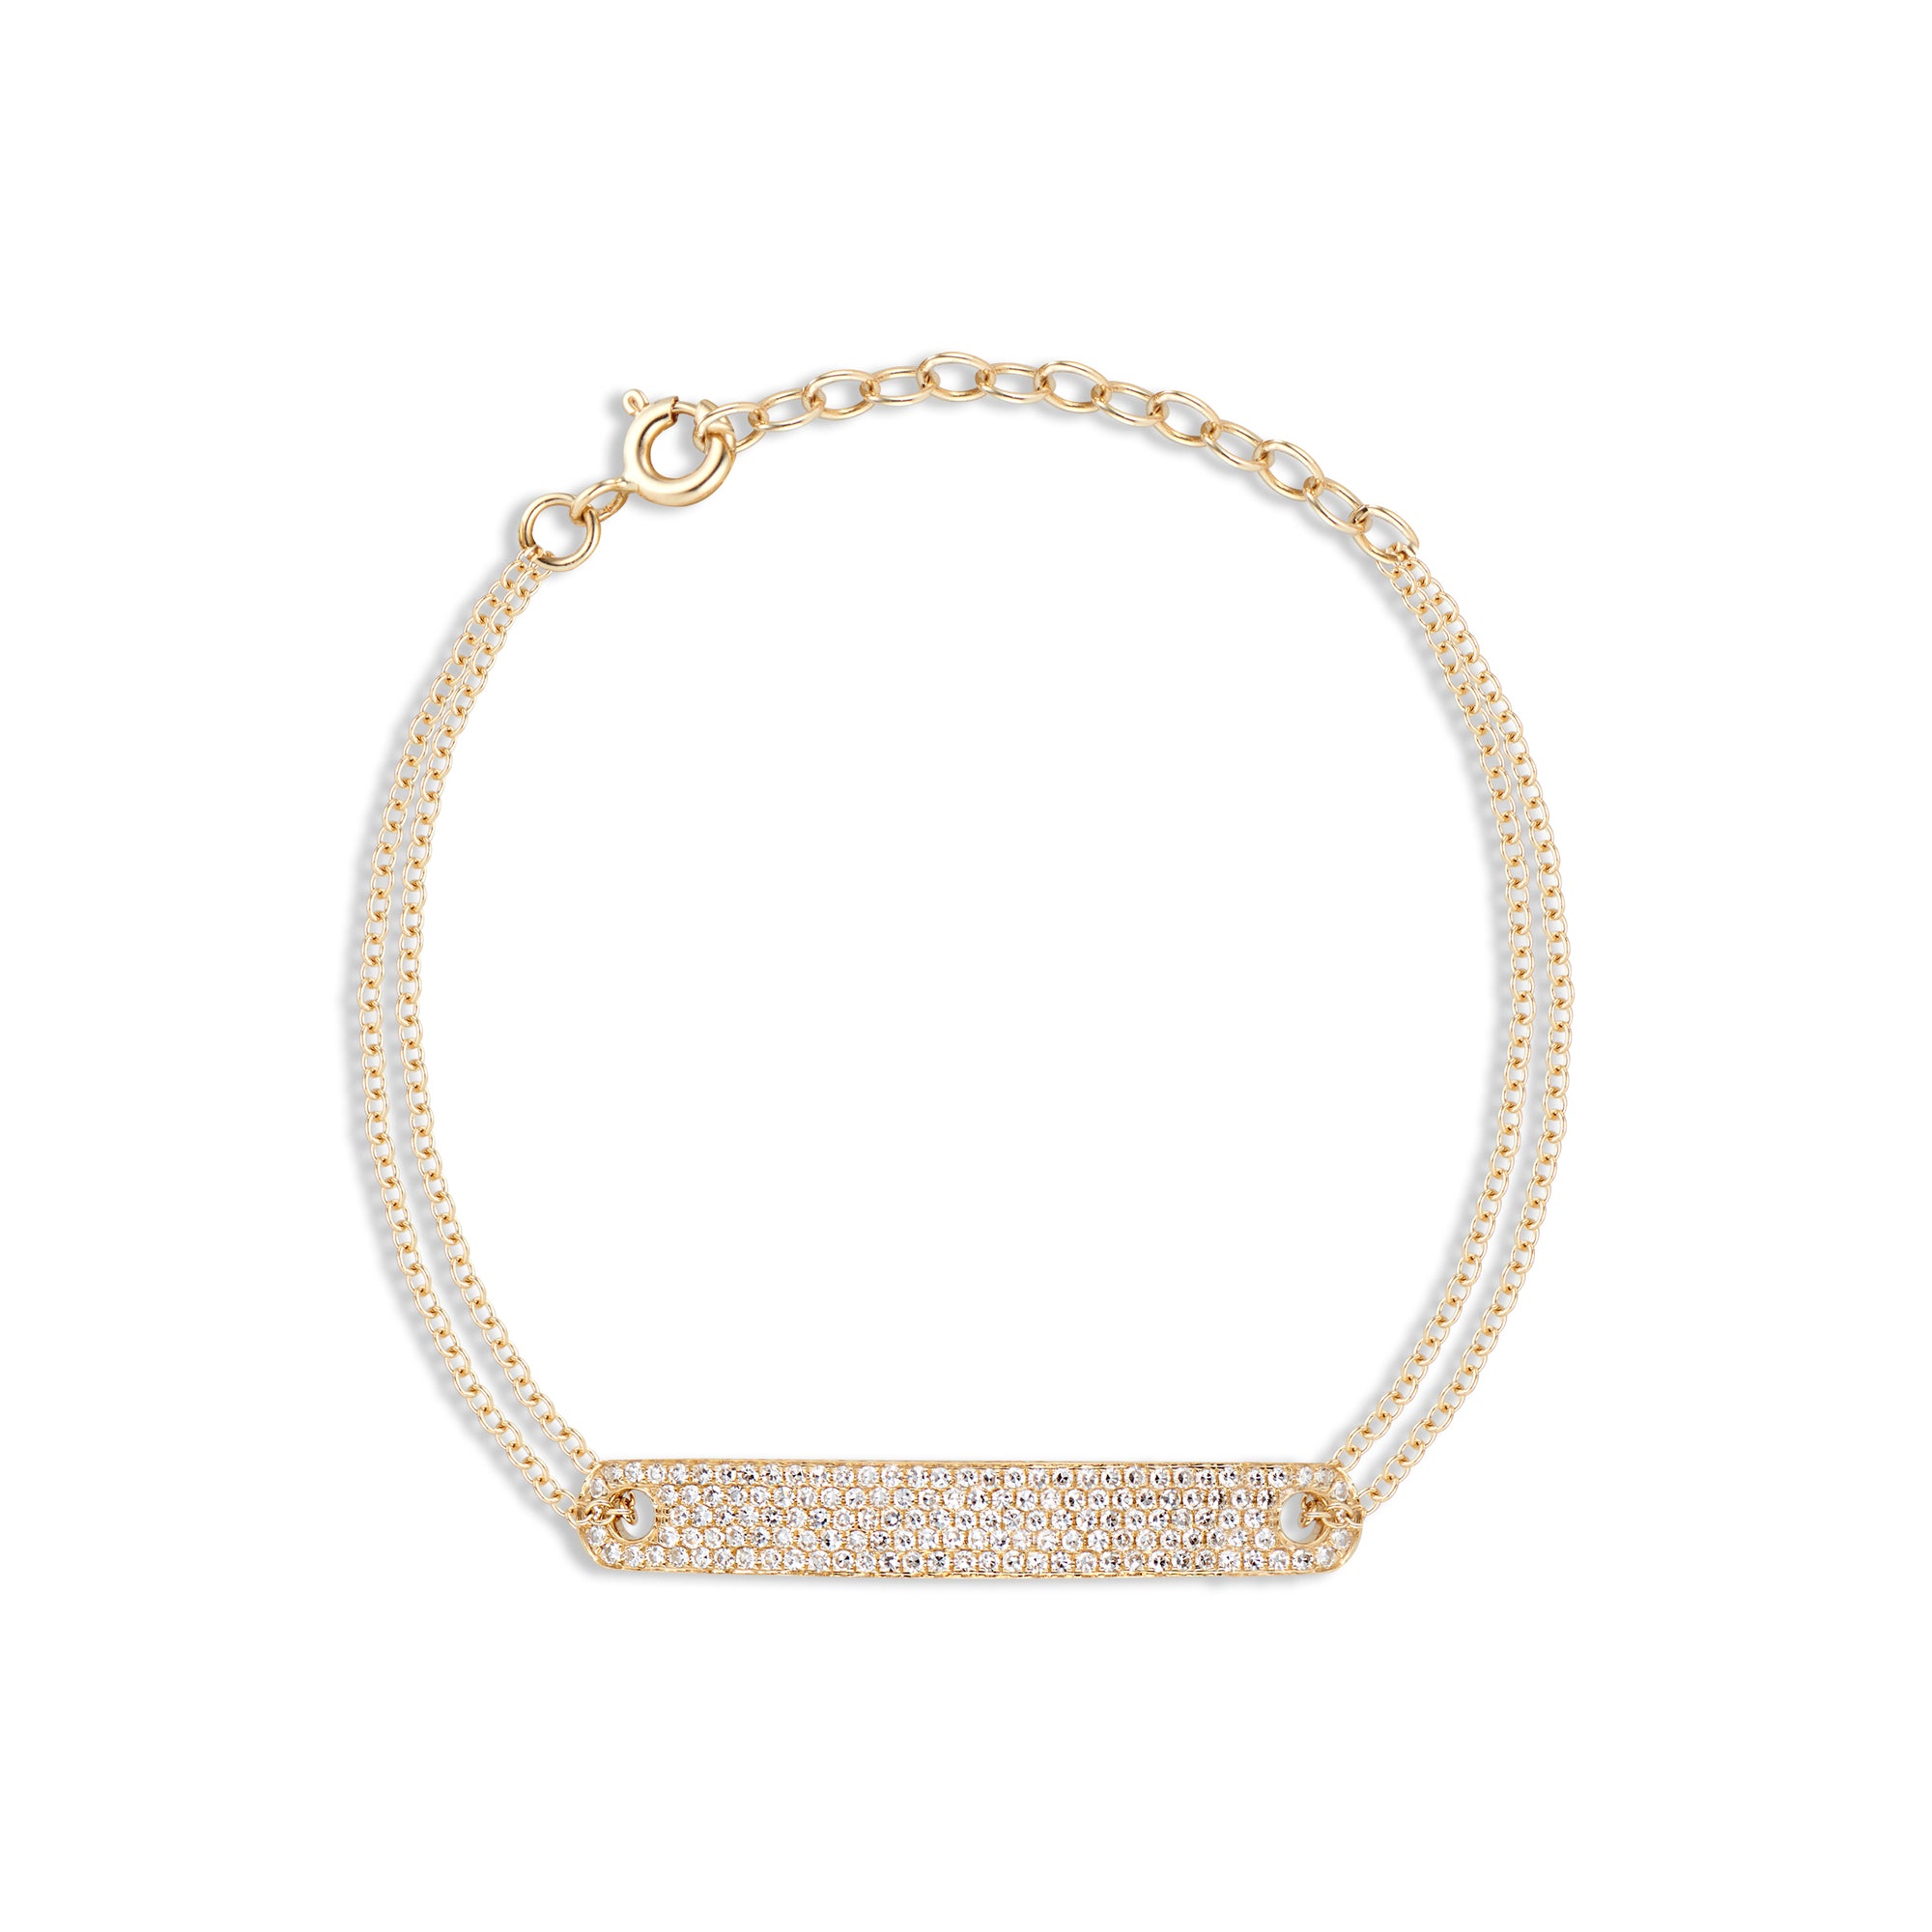 Double Cable Chain Bracelet with Diamond Bar - 14K gold weighing 3.10 grams - 145 round diamonds totaling 0.37 carats